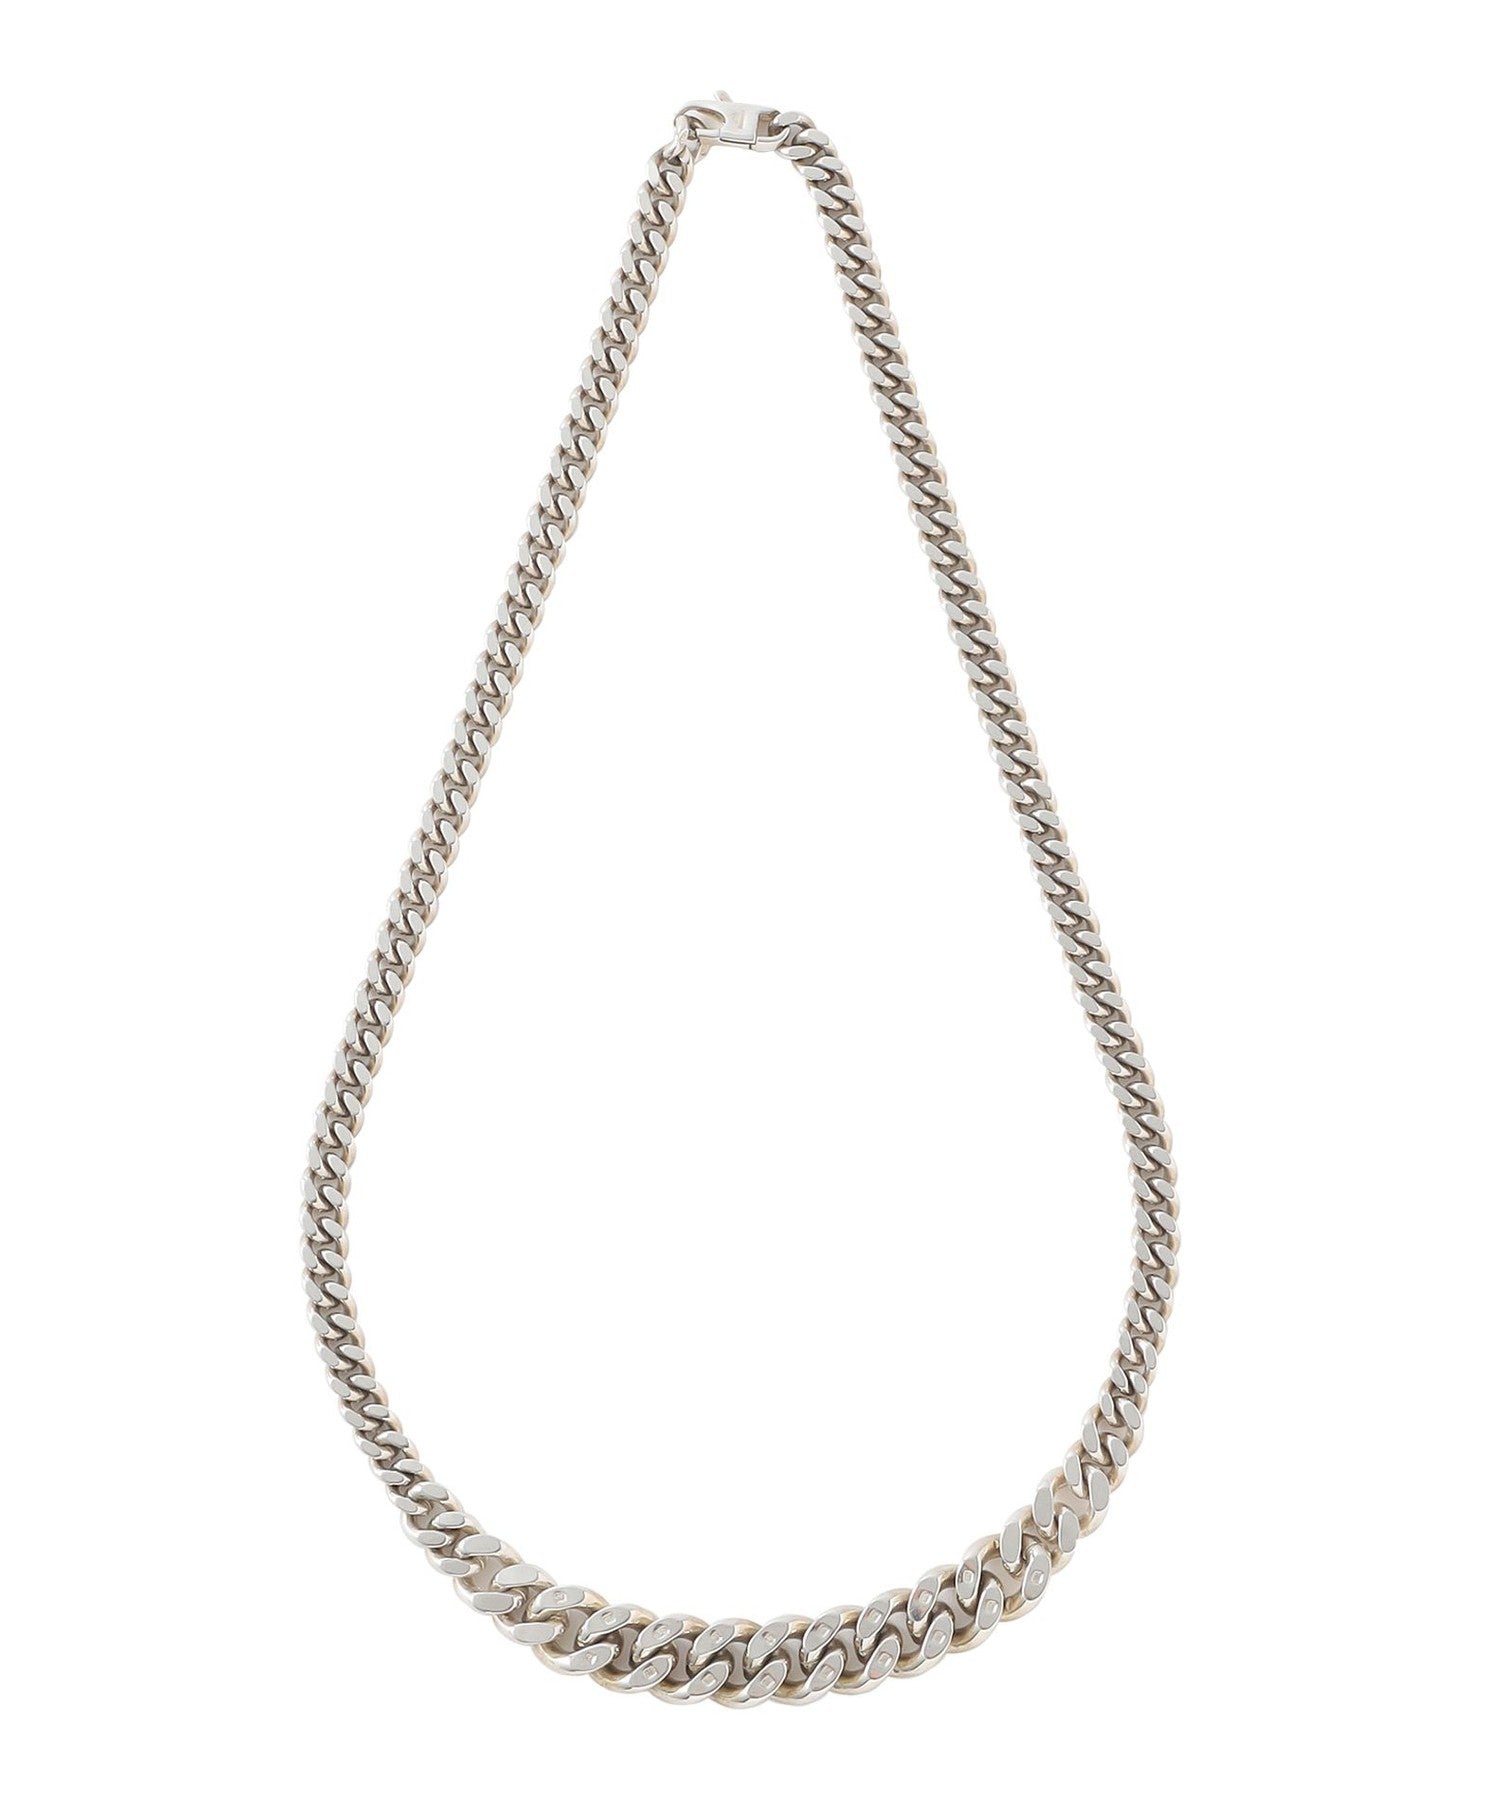 UNISEX】【BUNNEY】ネックレス Gradient Chain Necklace B04007